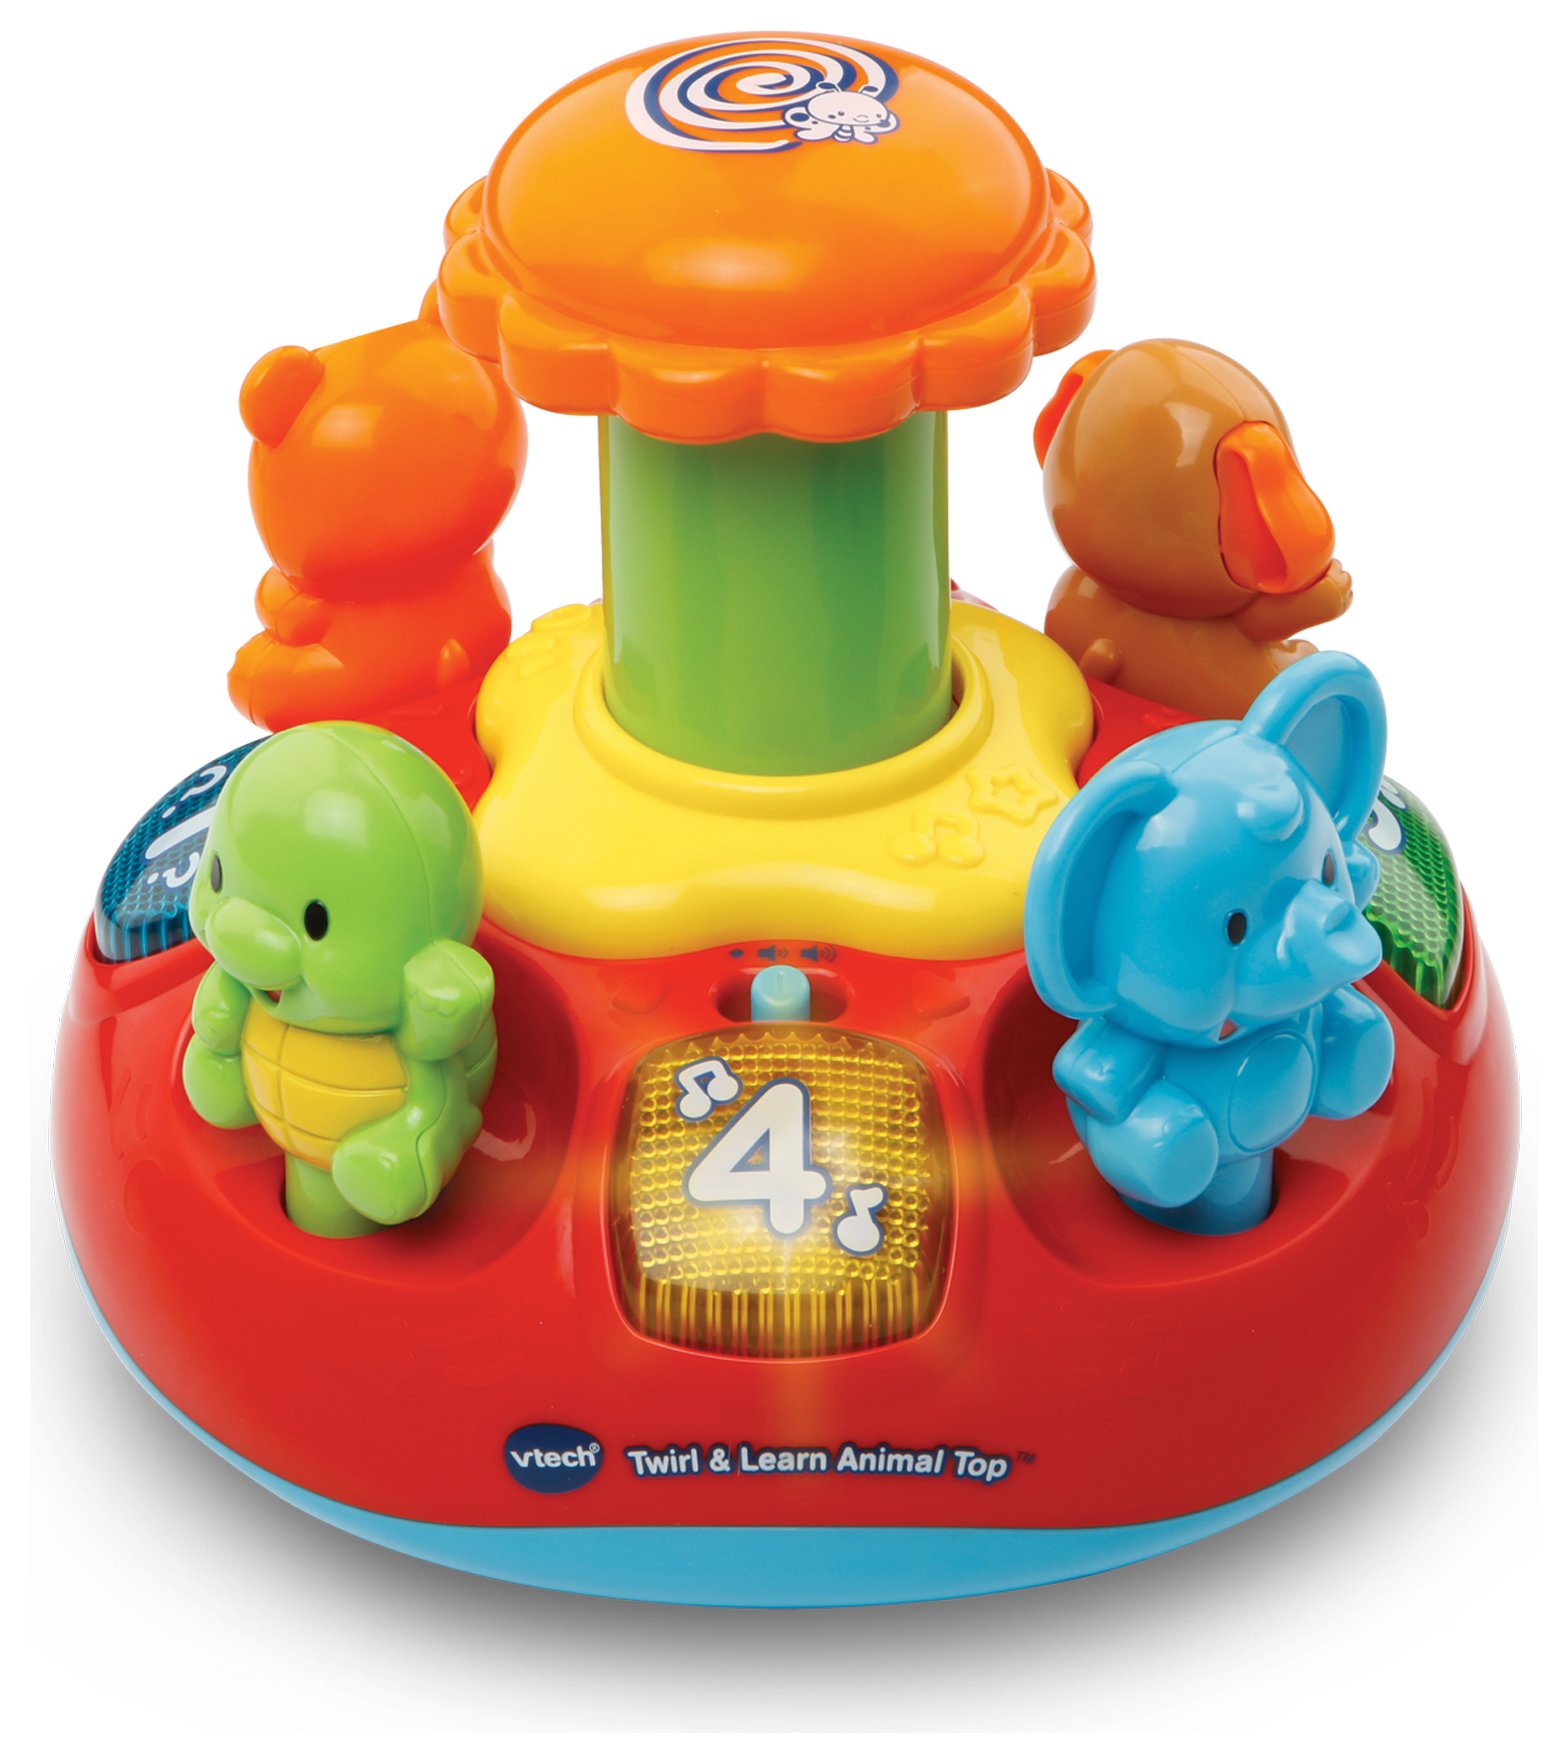 VTech Push and Play Spinning Top. Review